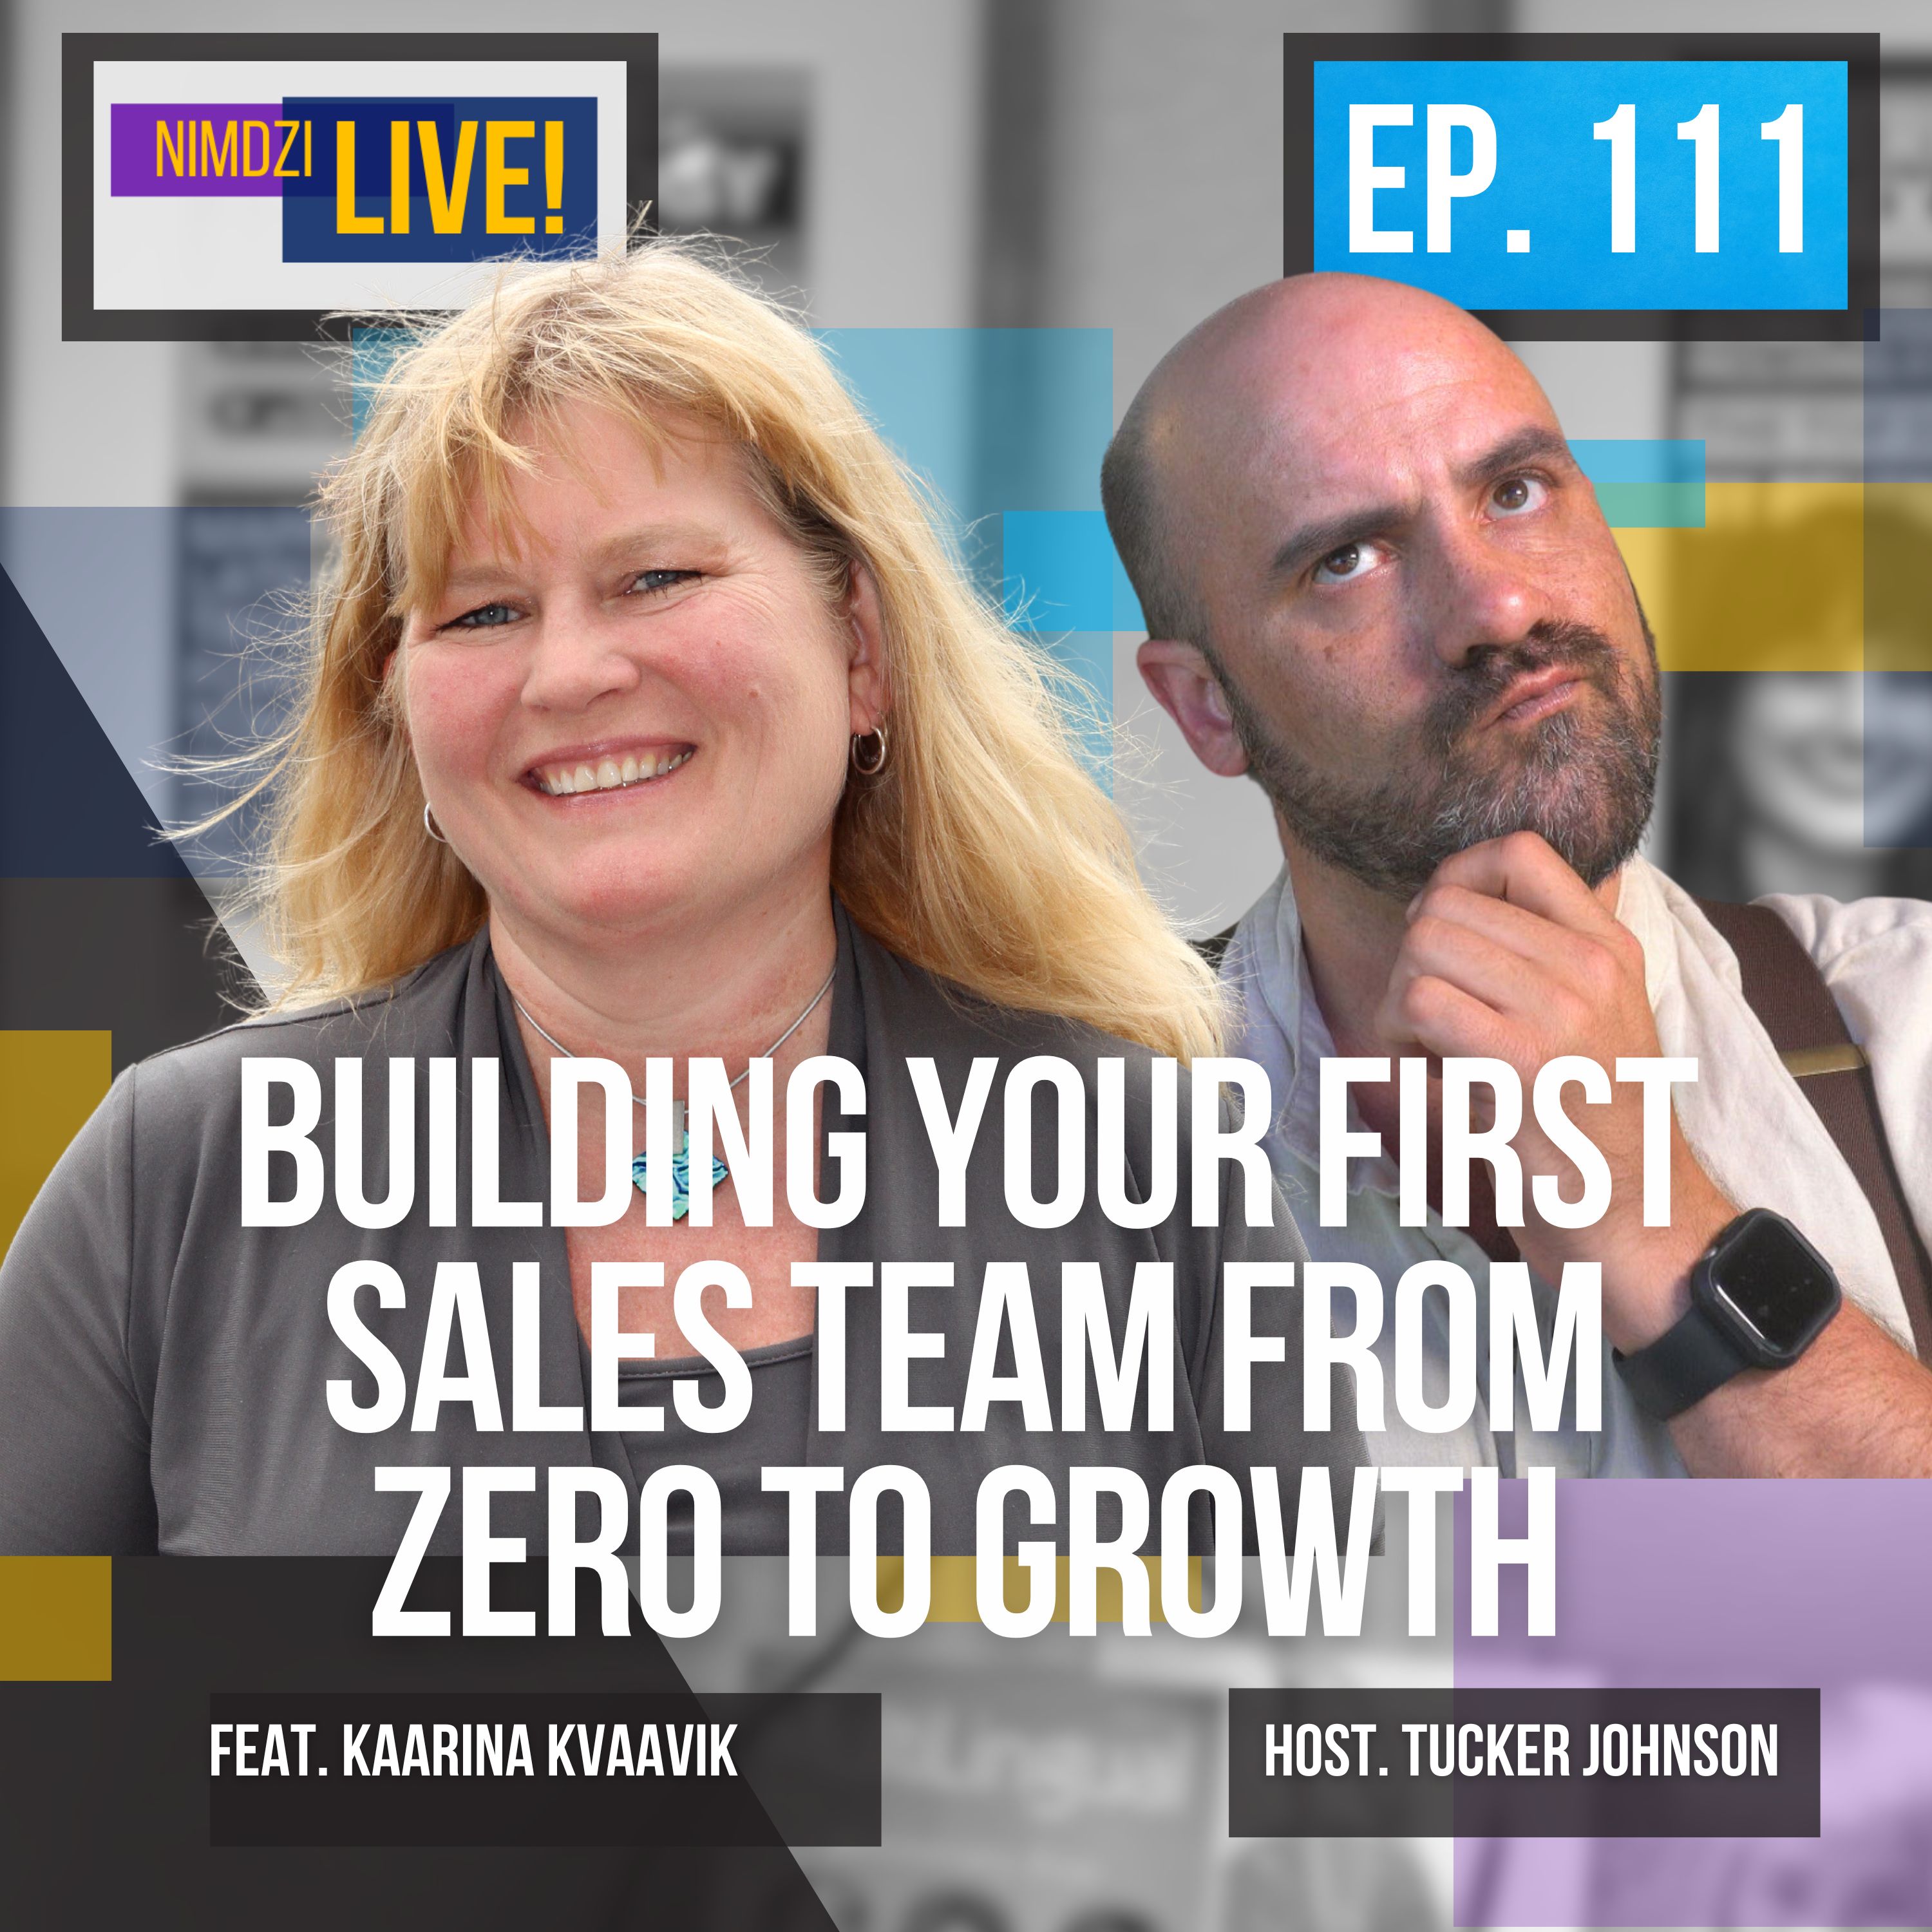 Building Your First Sales Team - From Zero to Growth feat. Kaarina Kvaavik